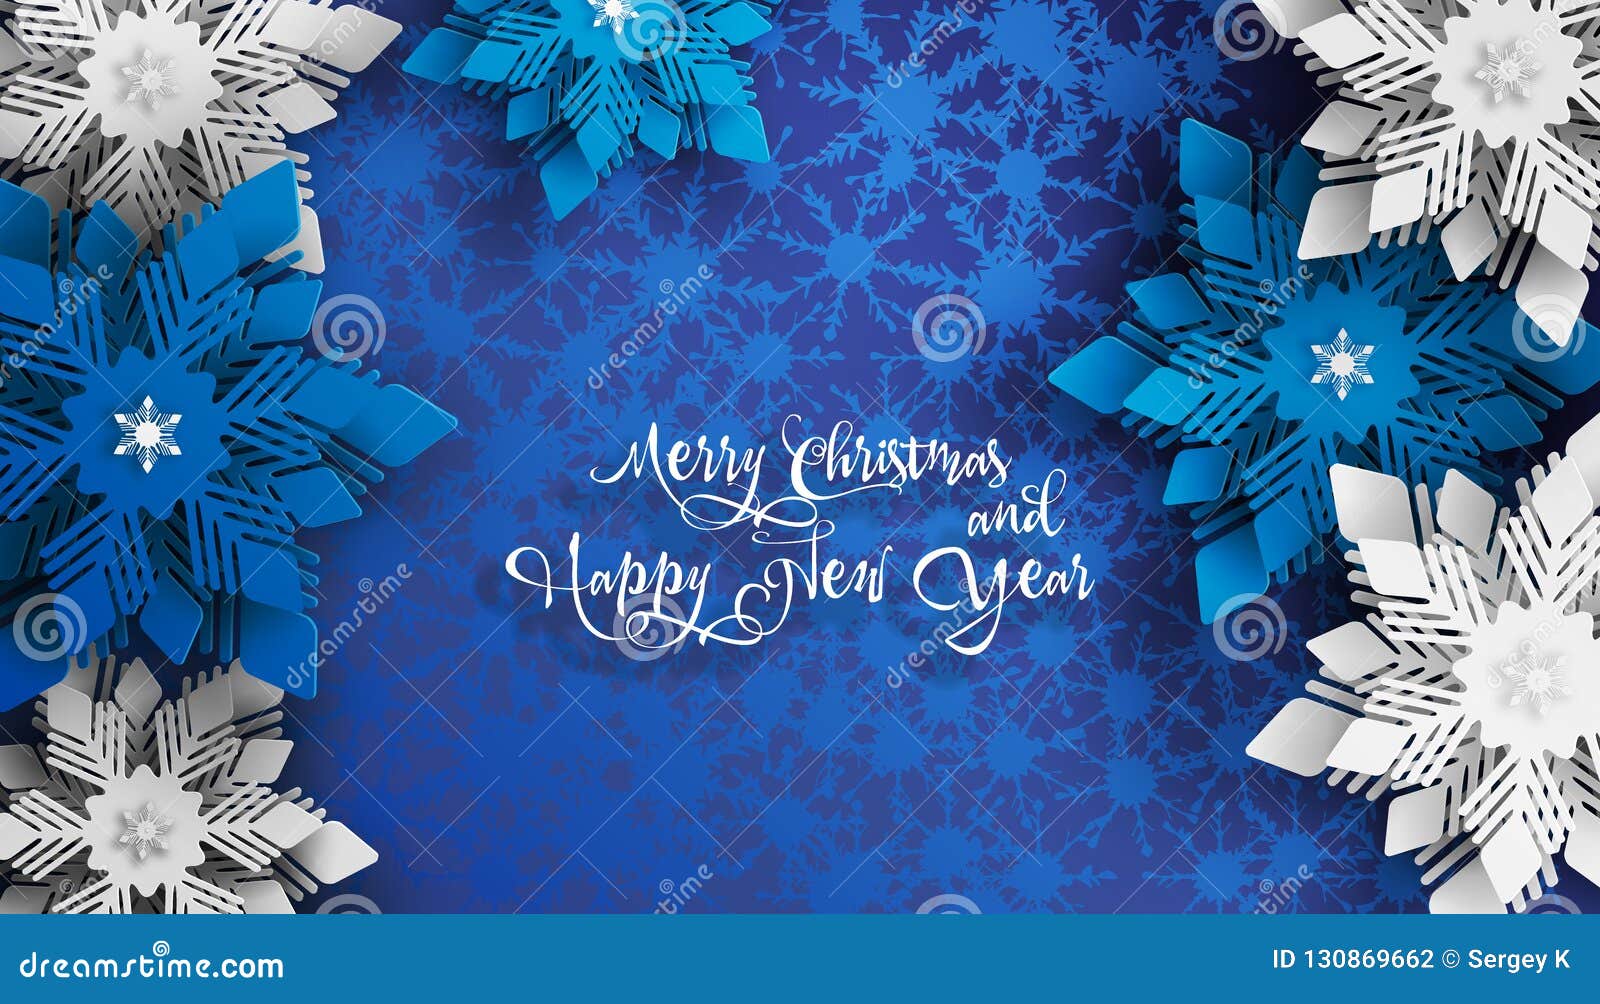 New Year 2020 and Christmas Design. Blue and White Christmas Paper Cut